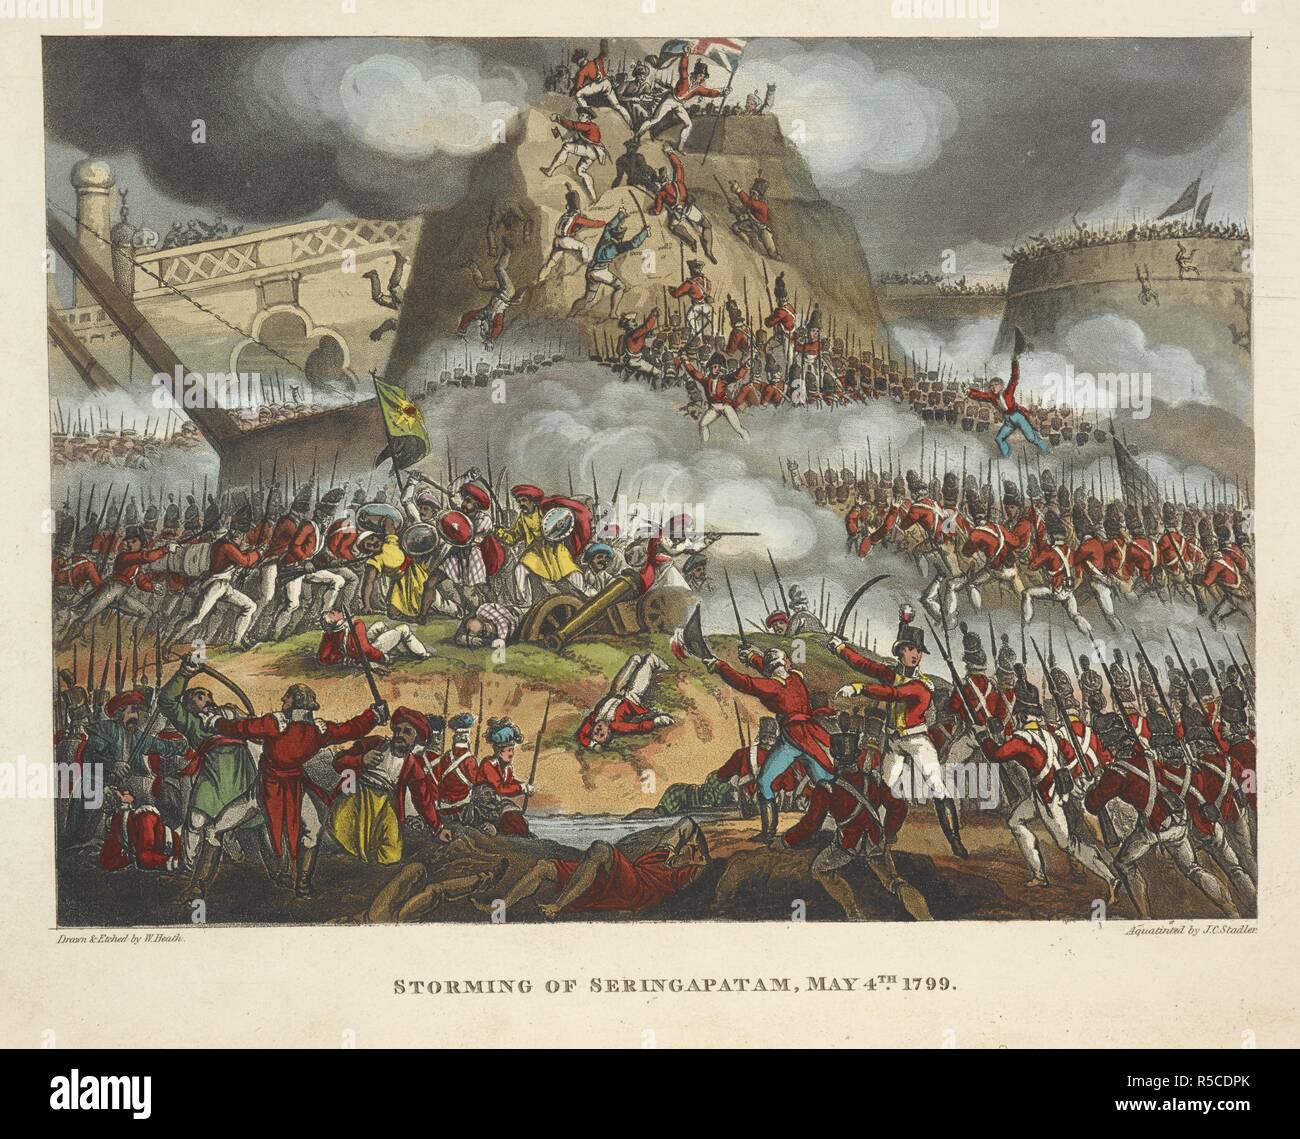 Storming of Seringapatam, May 4, 1799. The Siege of Seringapatam (5 April â€“ 4 May 1799) was the final confrontation of the Fourth Anglo-Mysore War between the British East India Company and the Kingdom of Mysore. The Wars of Wellington, a narrative poem. ... With ... engravings coloured ... By Dr. S. London, 1819. Source: 838.m.7 plate 2 page 11. Author: HEATH, WILLIAM. Stadler, J. C. Stock Photo